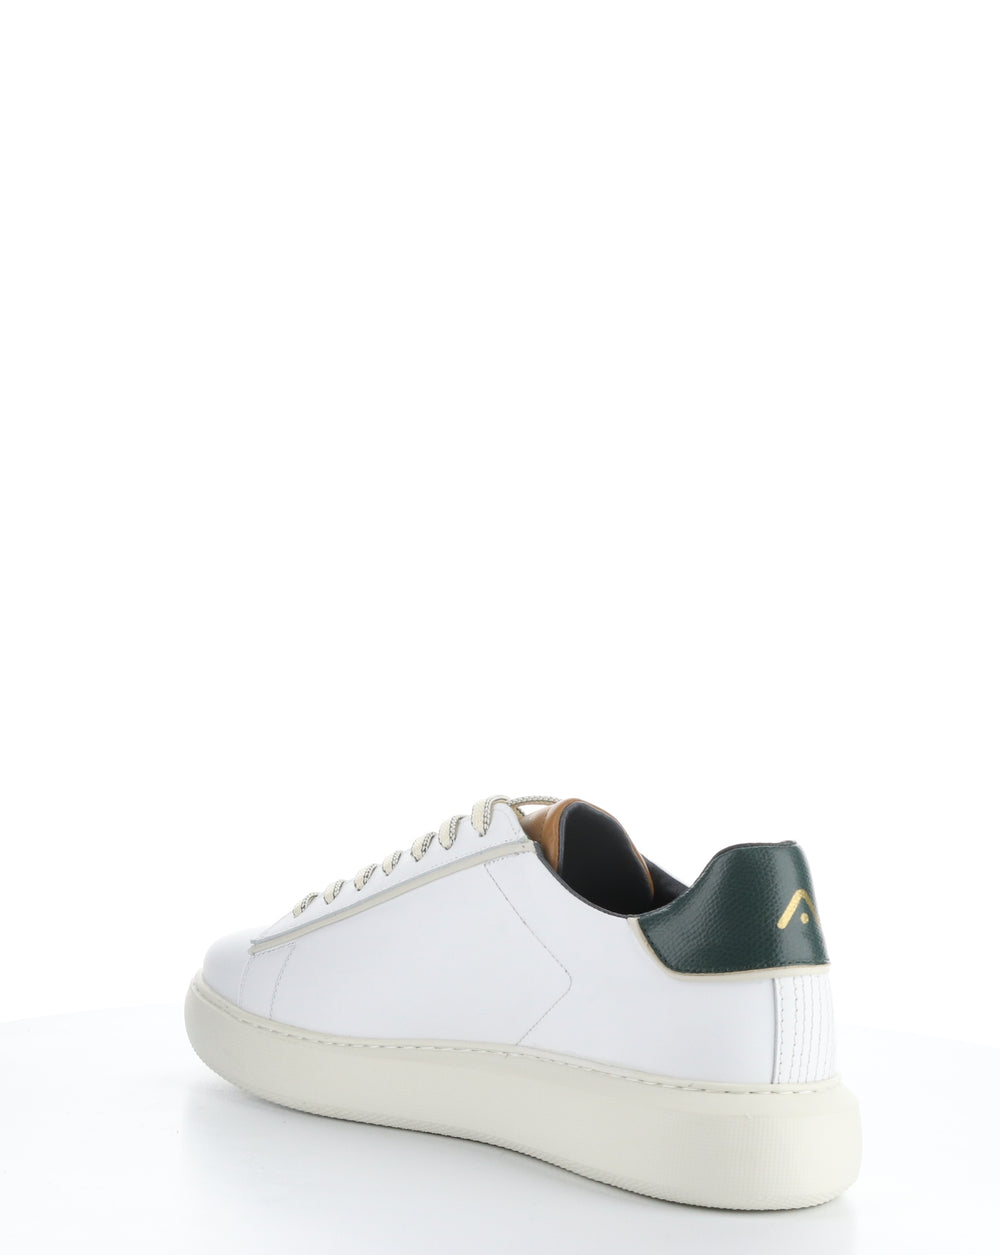 11677D WHITE/CAMEL/FOREST Lace-up Shoes